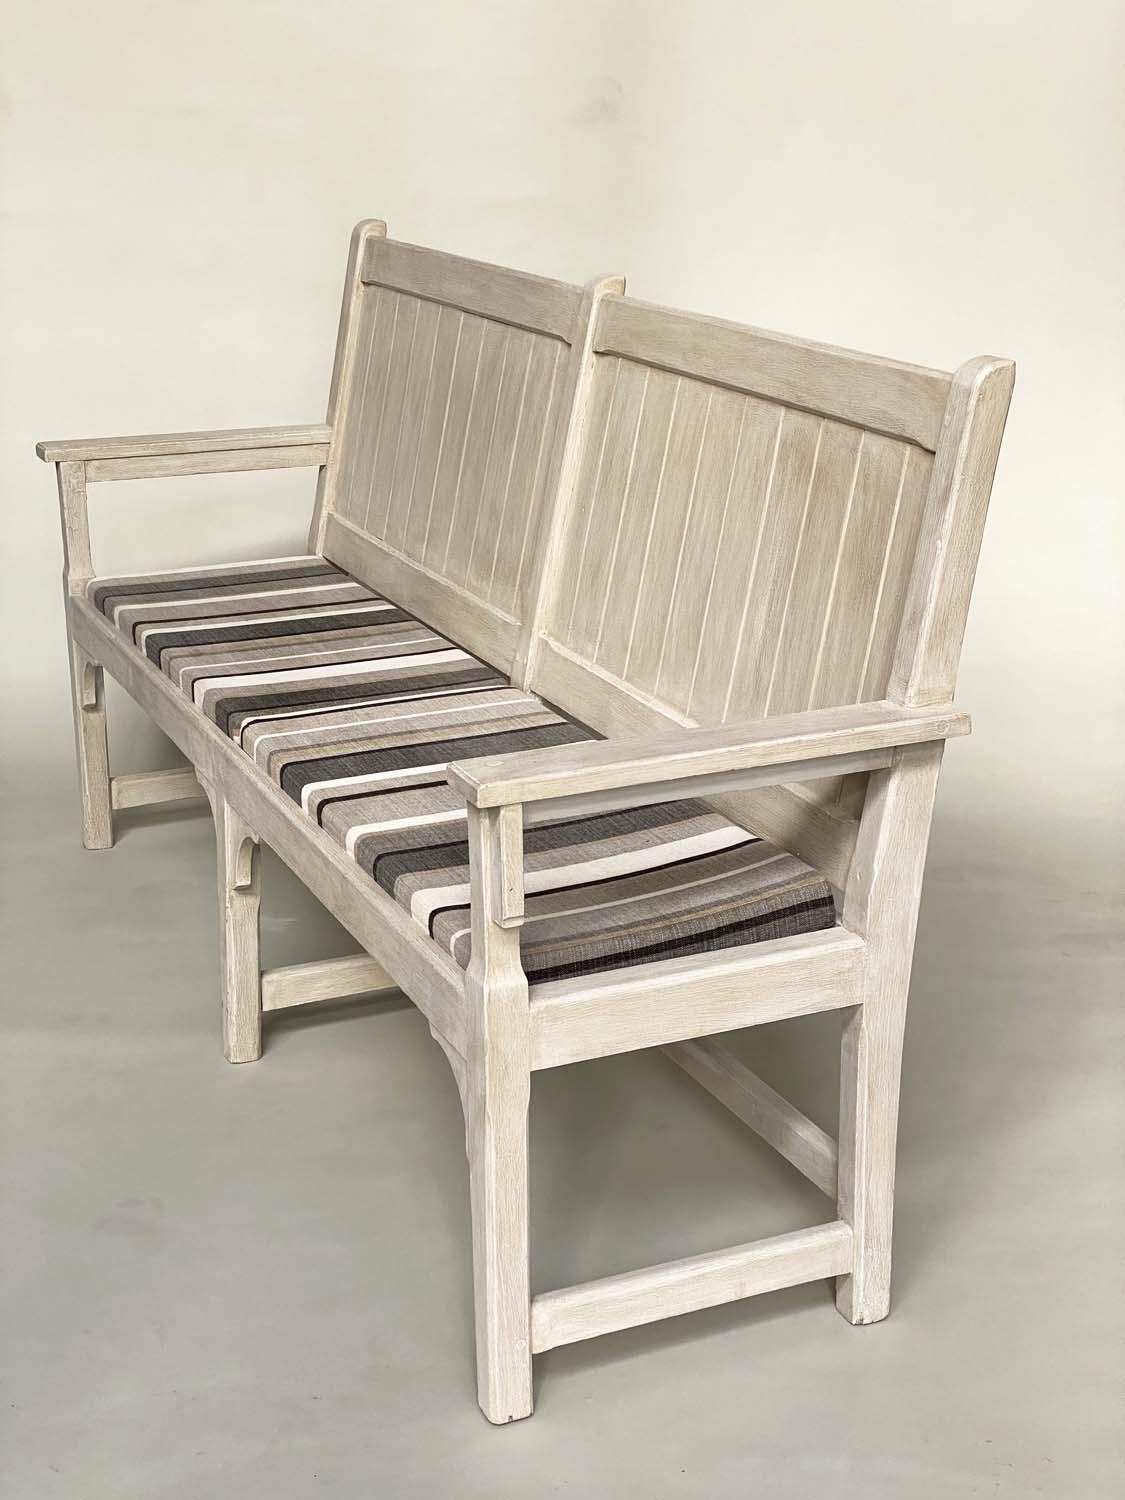 COUNTRY HOUSE BENCH, 189cm W, French style, grey painted, with striped seat cushions and arms. - Image 2 of 6